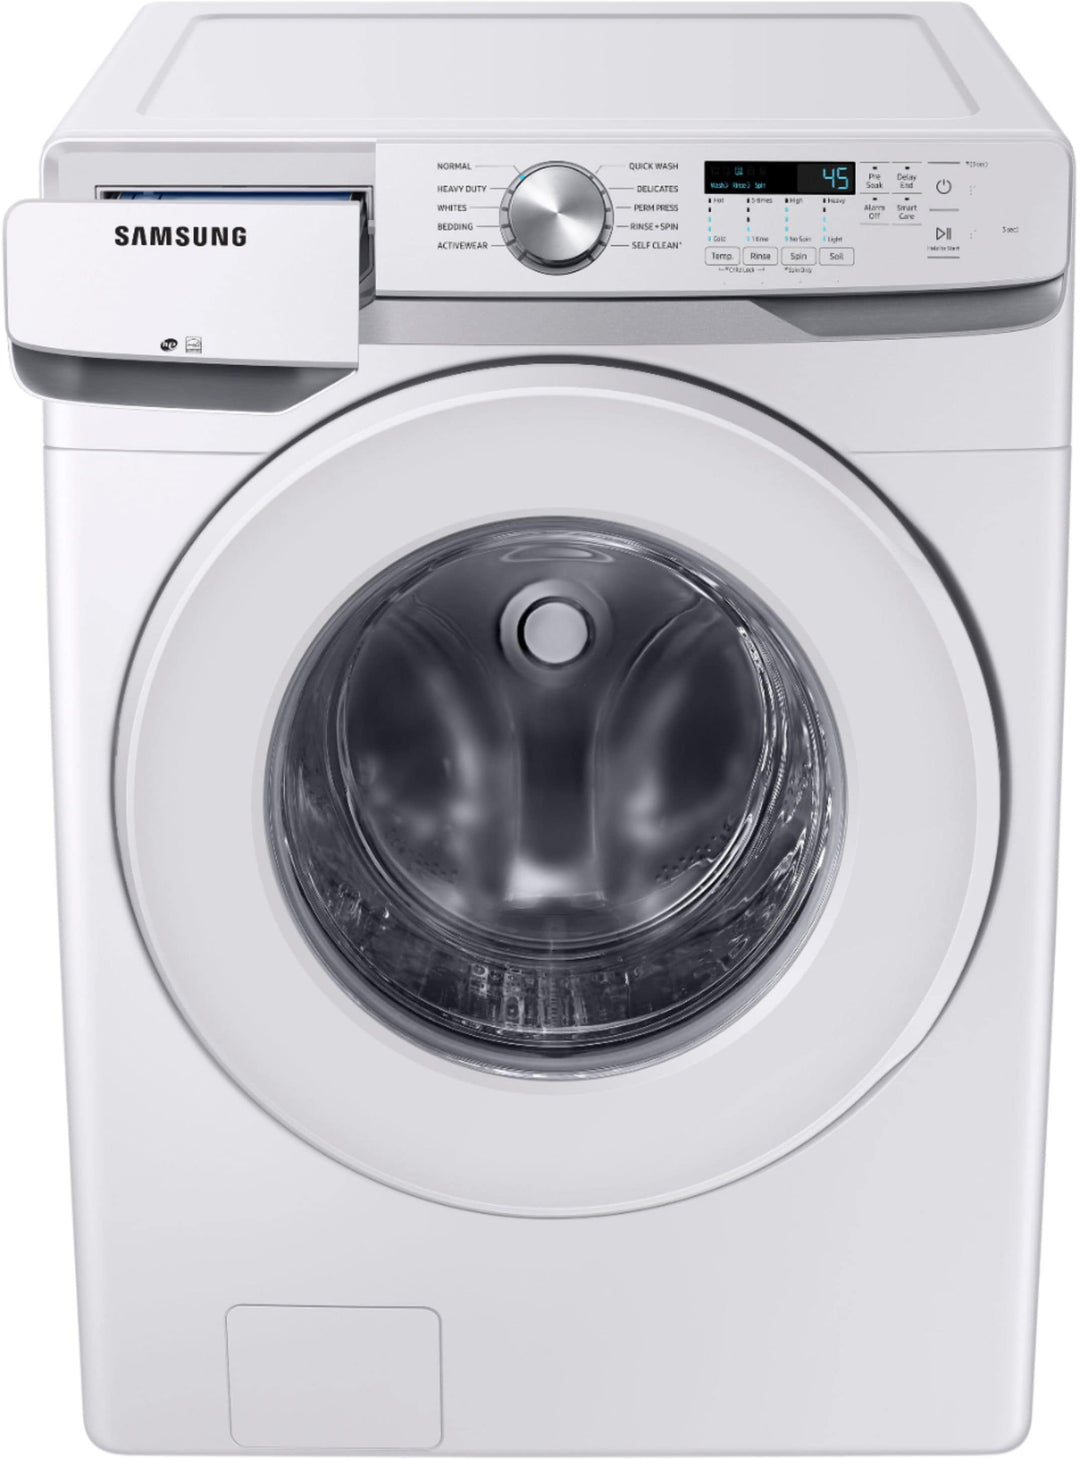 Samsung - 4.5 Cu. Ft. High Efficiency Stackable Front Load Washer with Vibration Reduction Technology+ - White_3